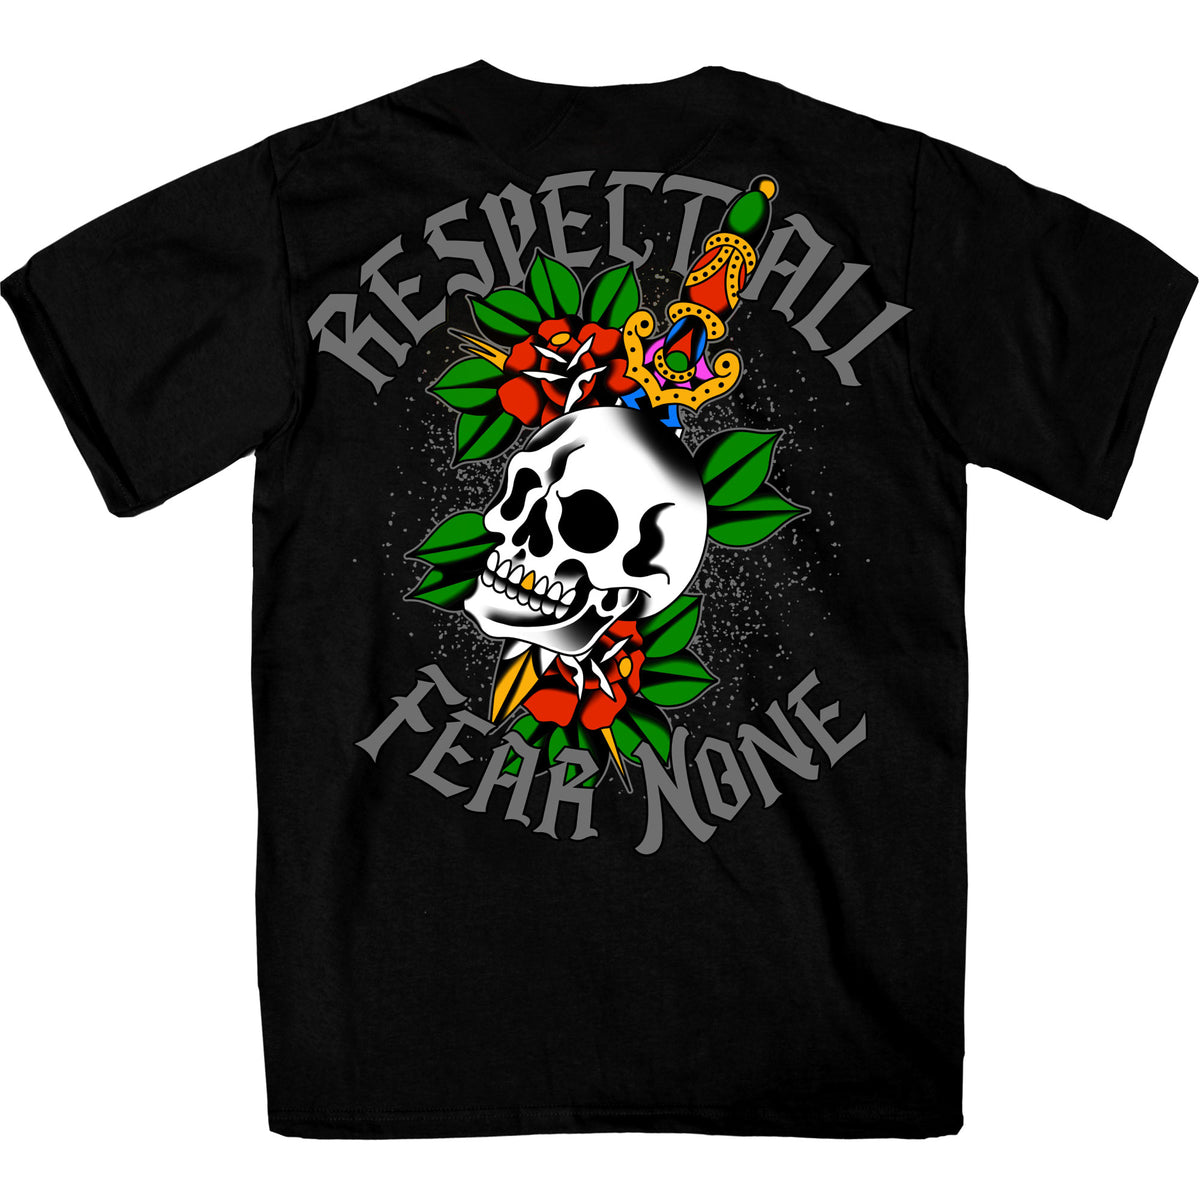 Hot Leathers Respect All Fear None Skull Tattoo T-Shirt